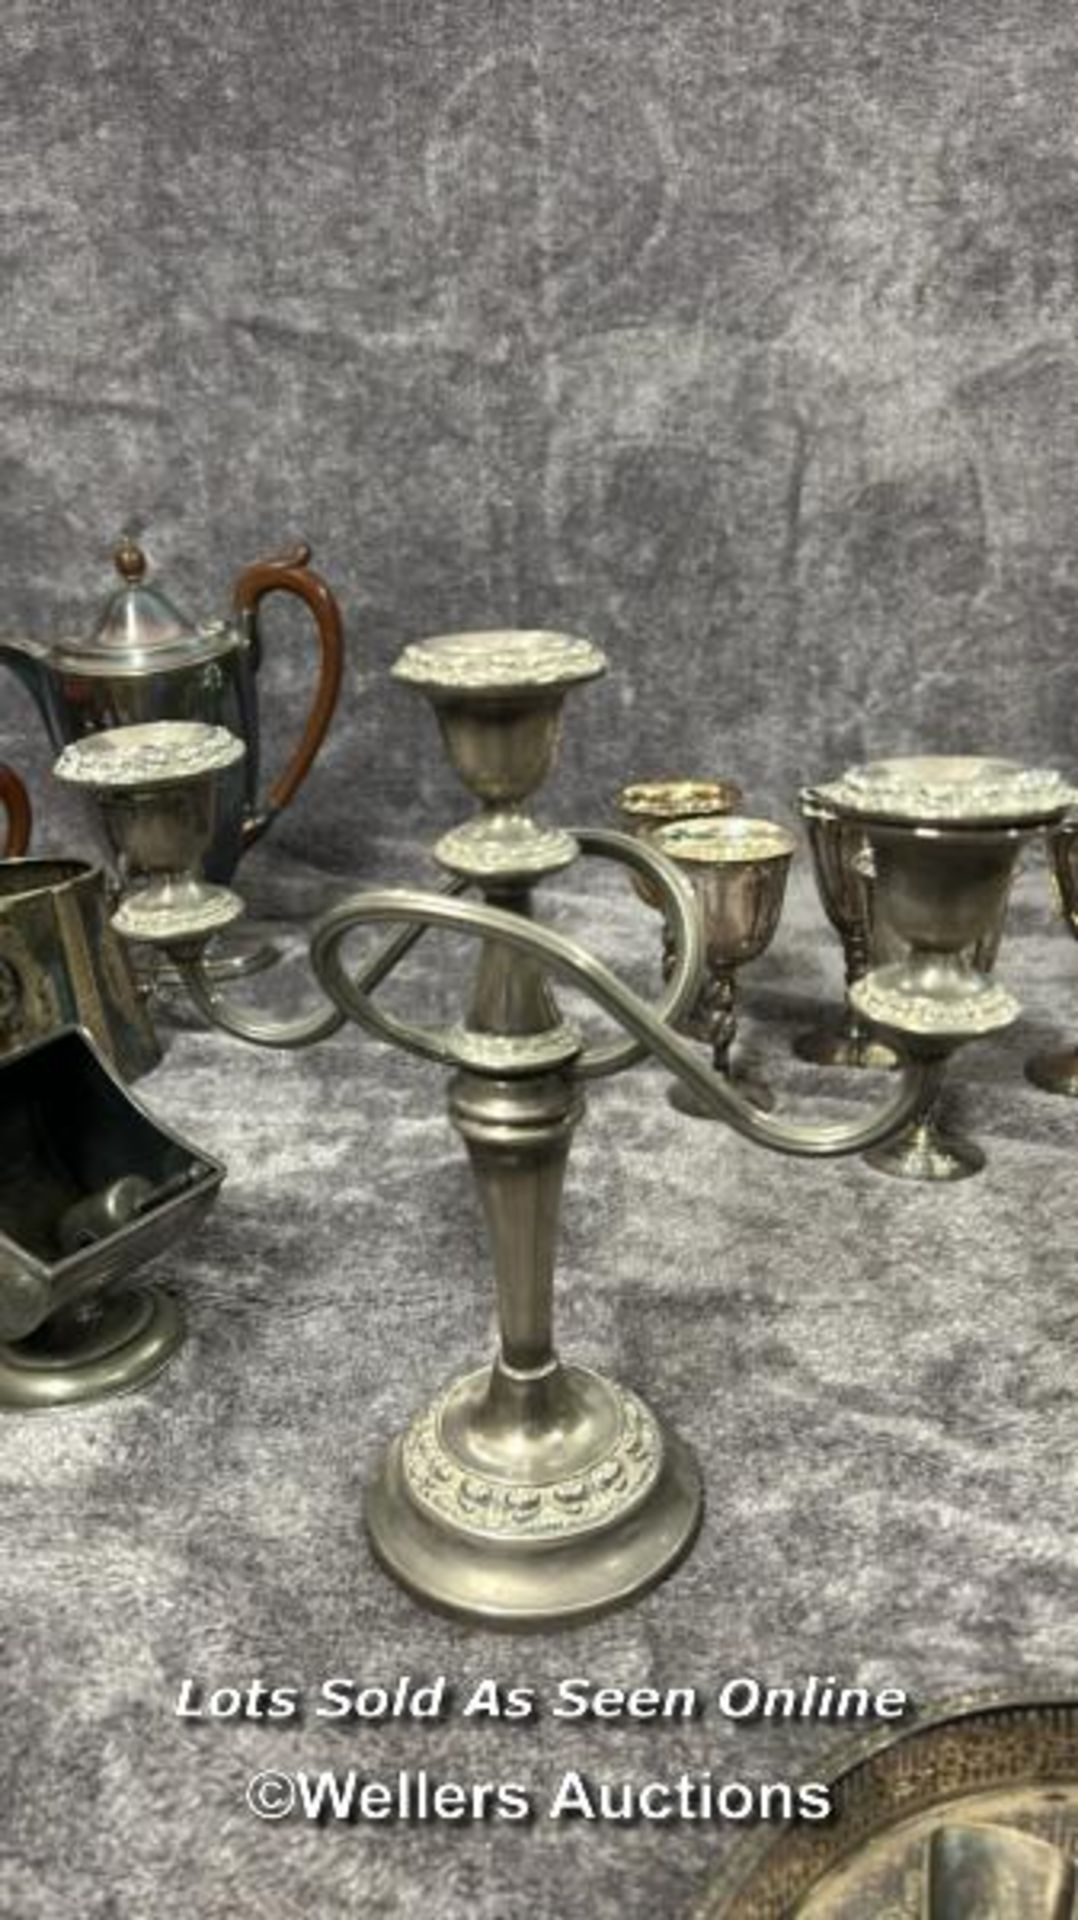 A large collection of antique metal plated items including a three armed candelabra, goblets, - Image 2 of 17